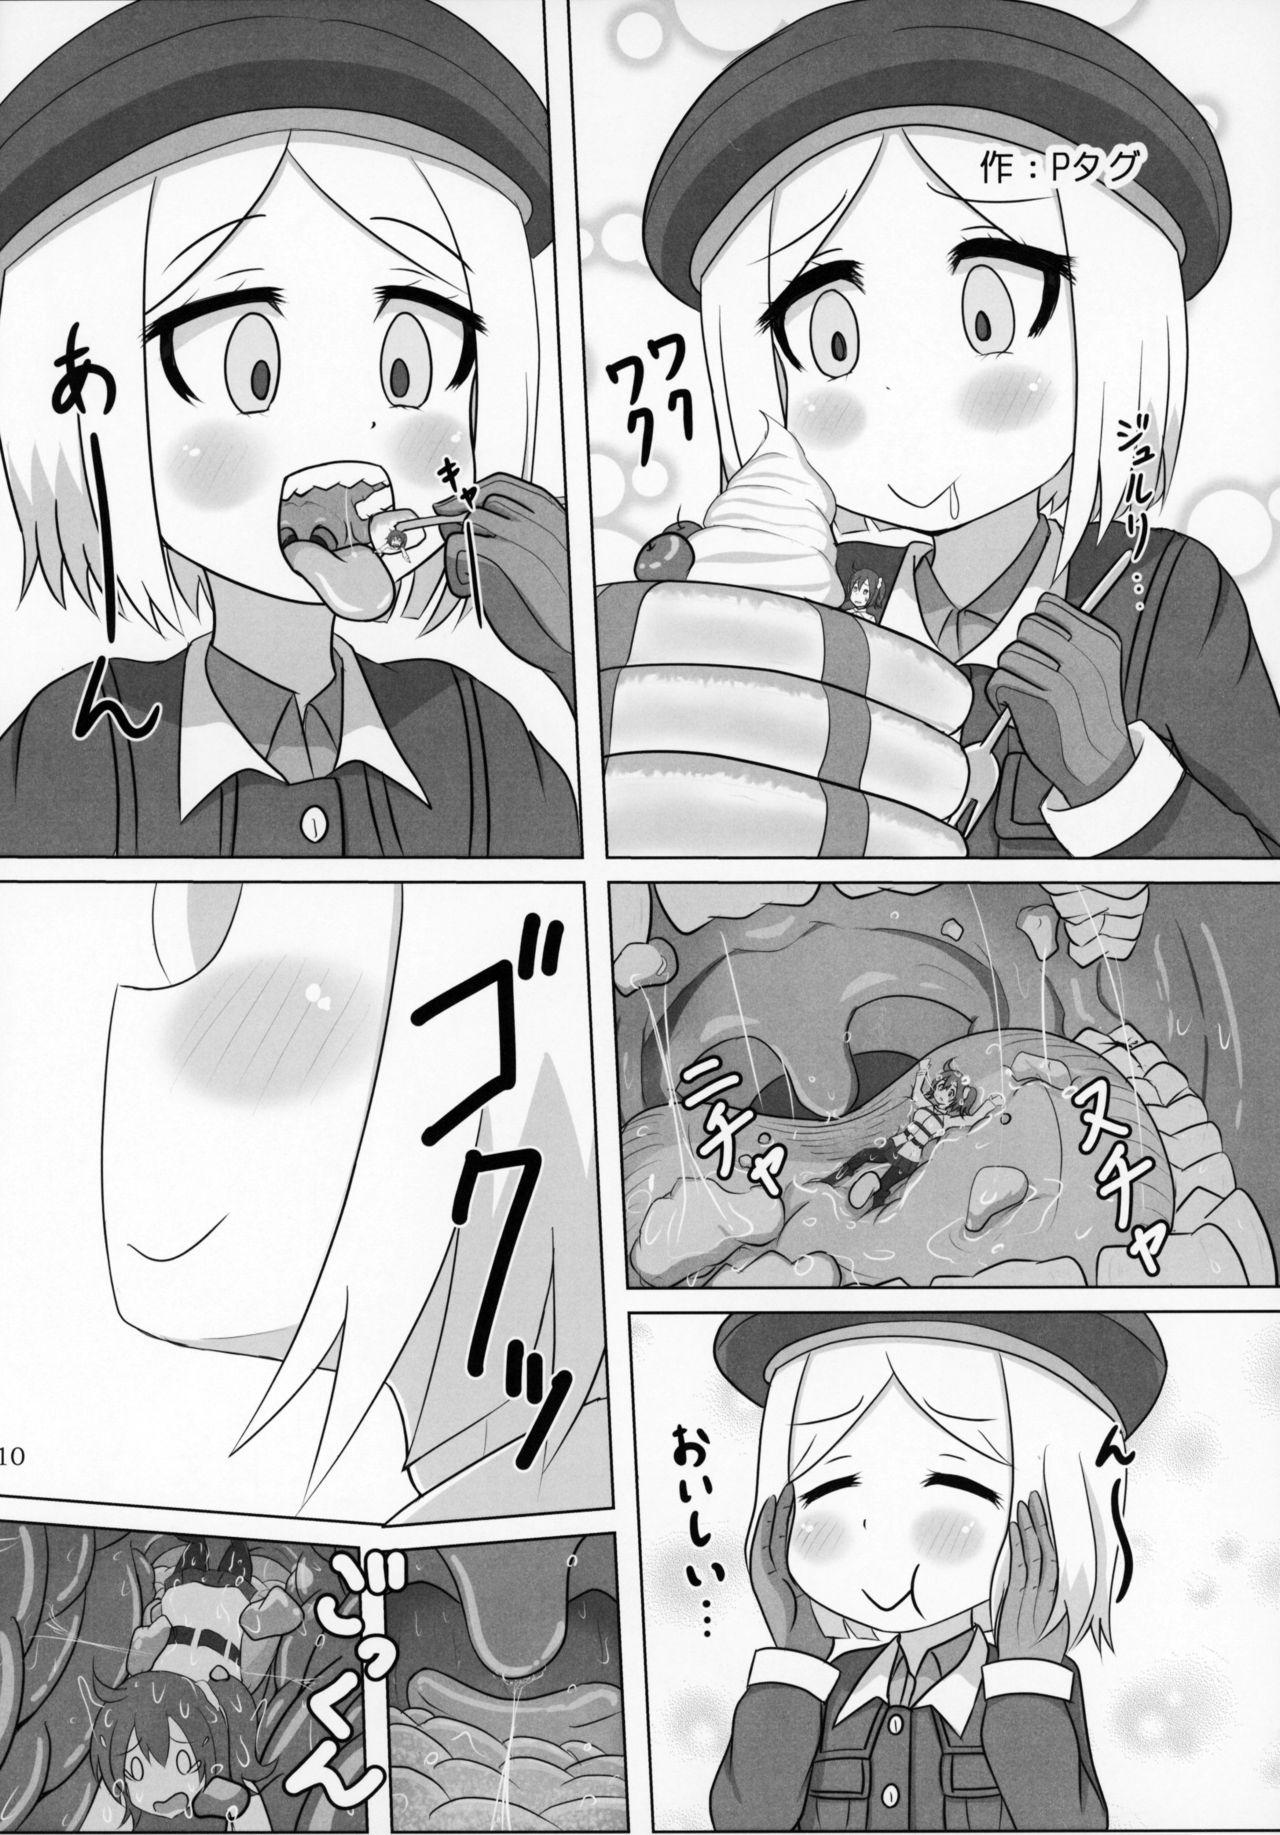 Polla Fate VoreryOrder A.D.2018 Marunomi Tokuiten - Fate grand order Licking Pussy - Page 9